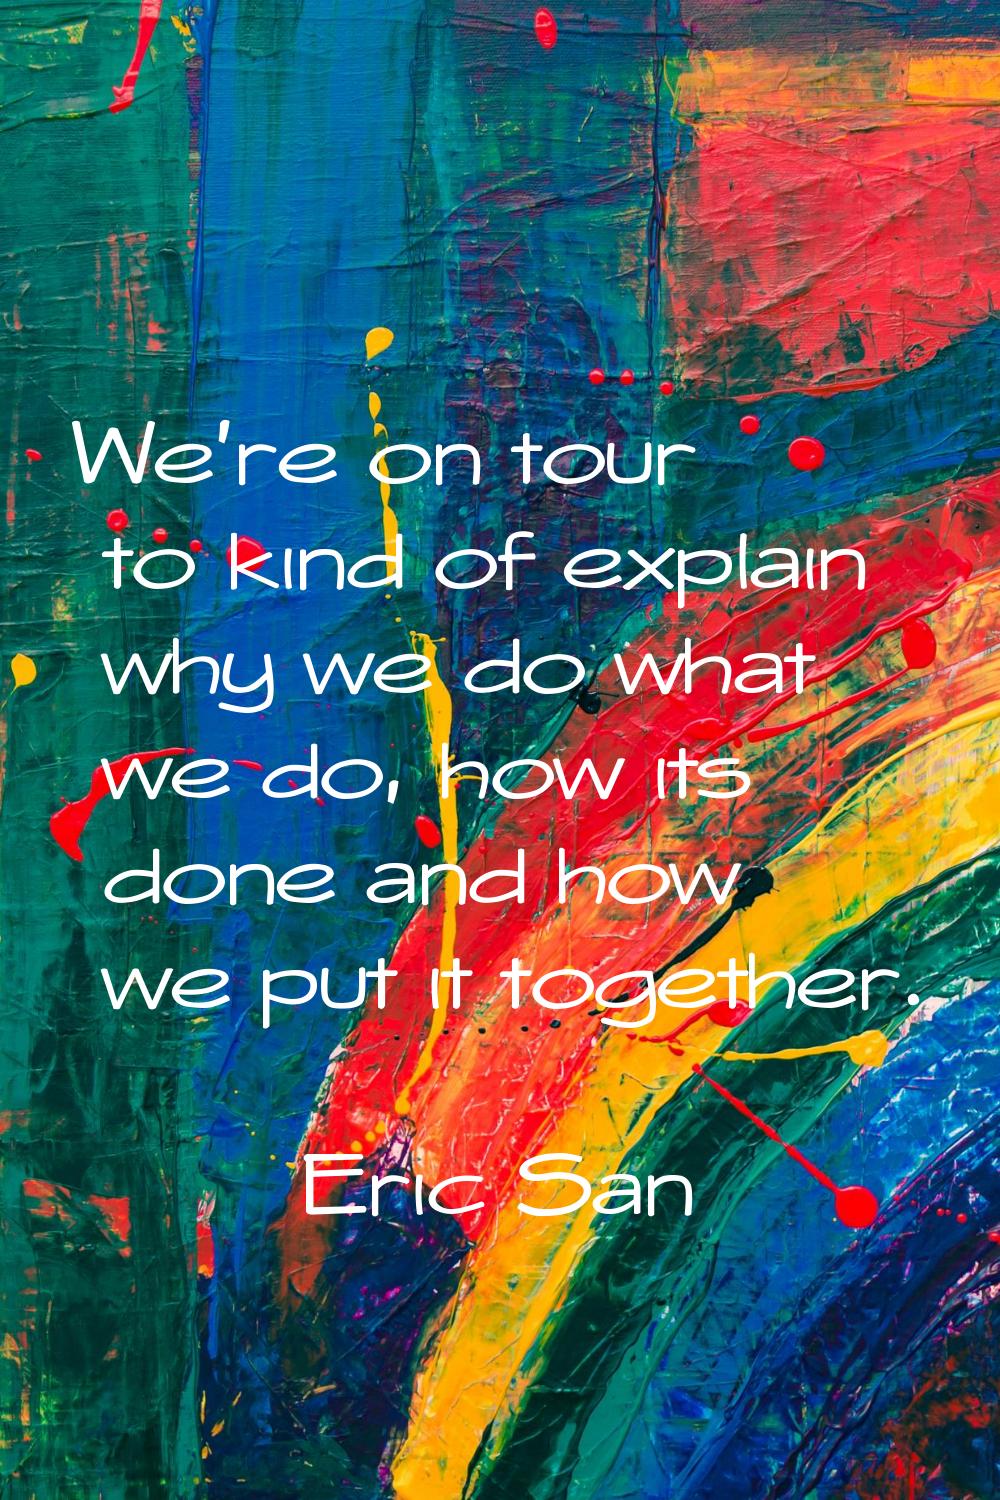 We're on tour to kind of explain why we do what we do, how its done and how we put it together.